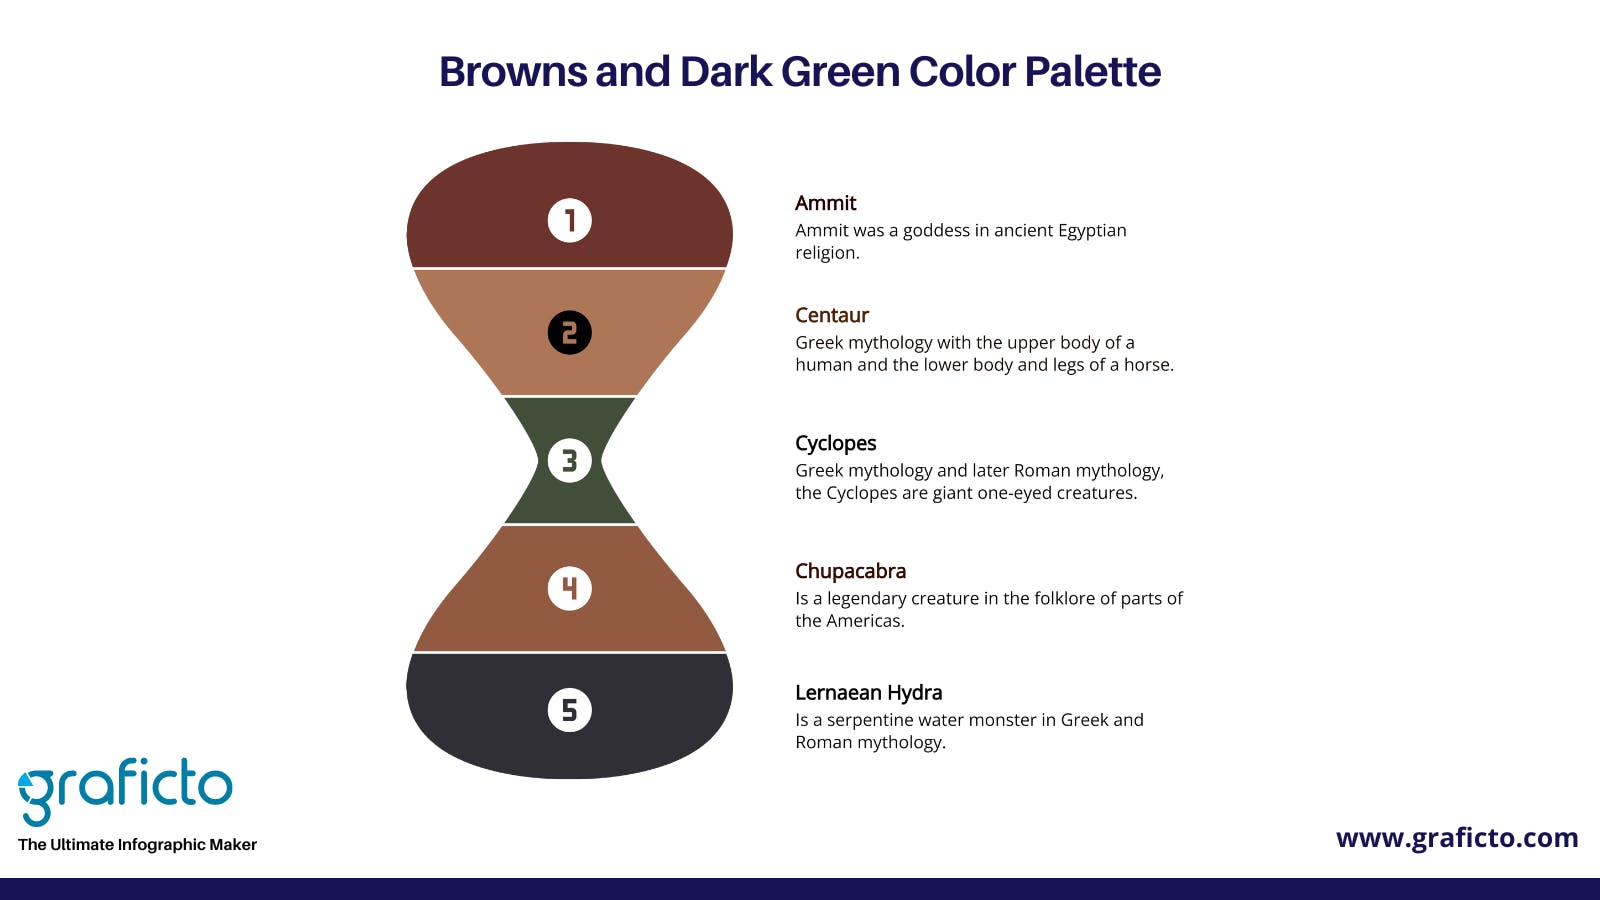 Browns and Dark Green graficto Christmas Color Palettes